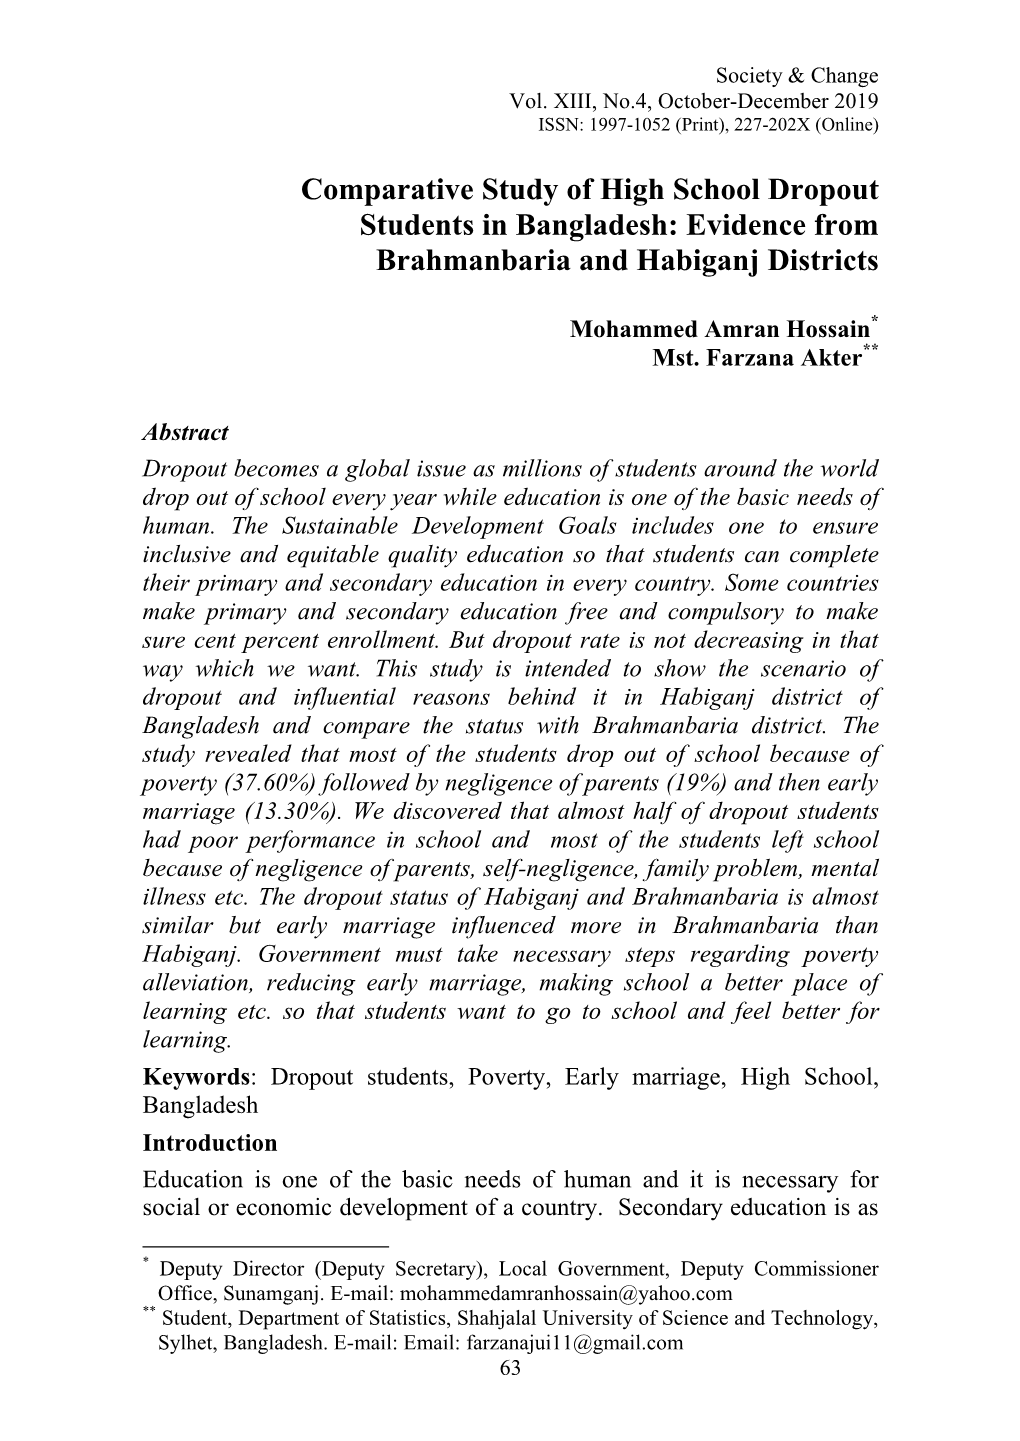 Comparative Study of High School Dropout Students in Bangladesh: Evidence from Brahmanbaria and Habiganj Districts